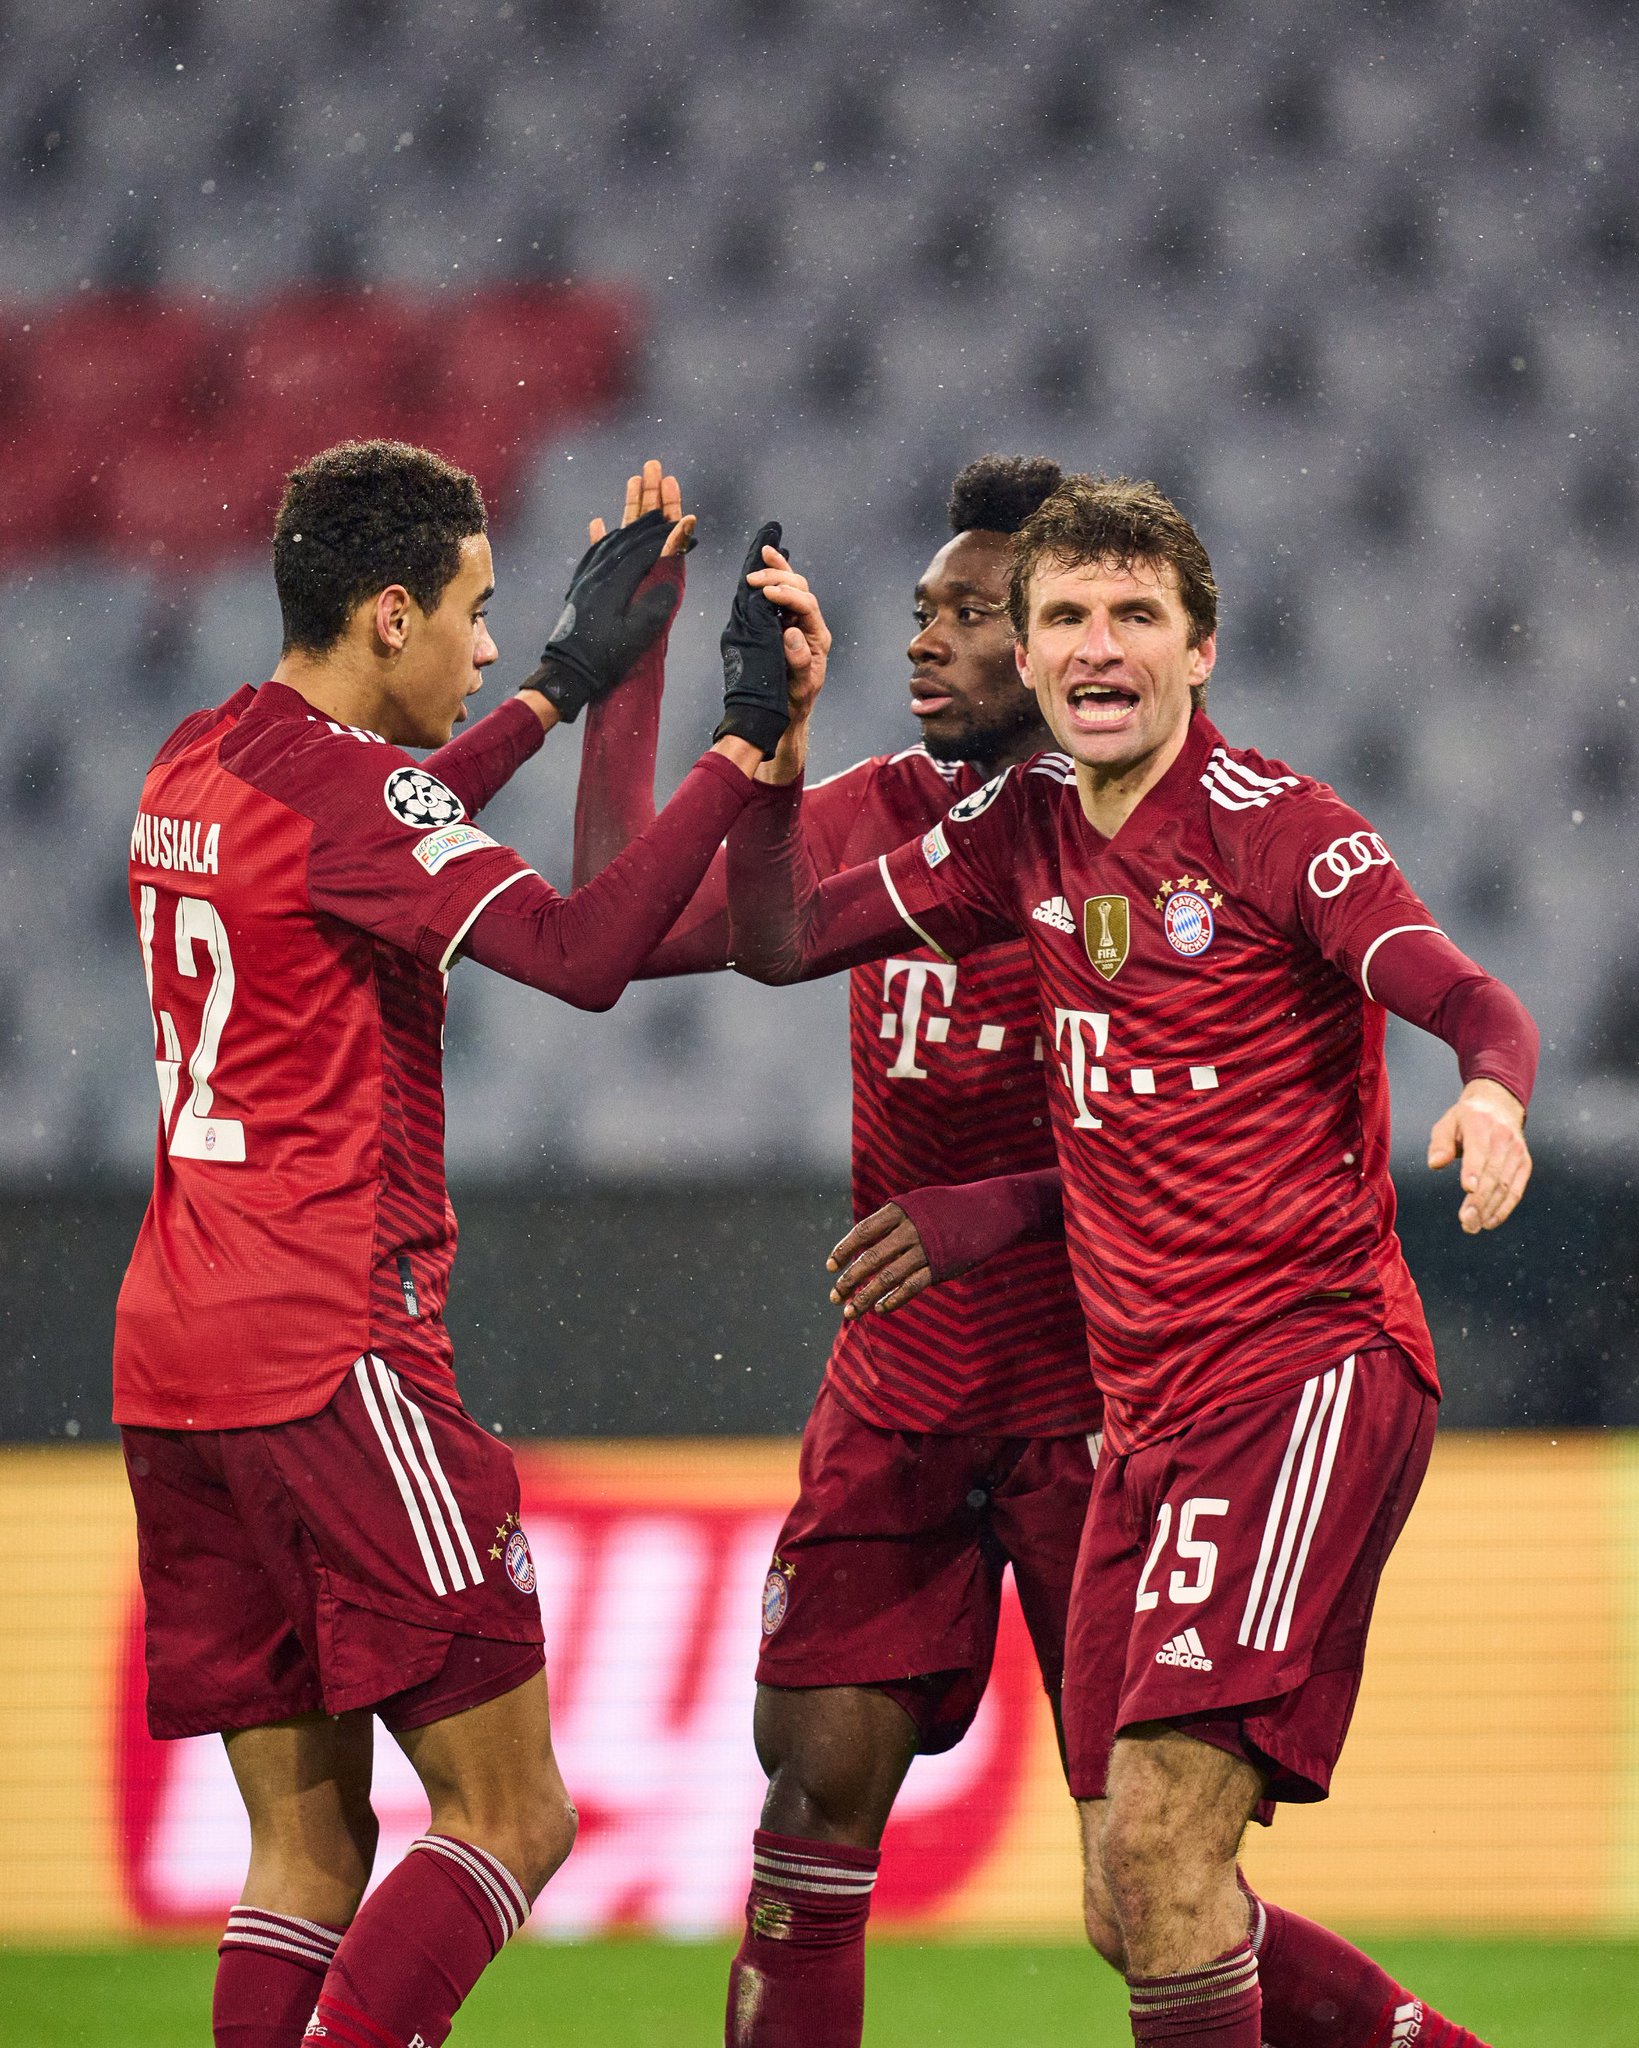 UCL: Bayern Send Barca To Europa League After Dominant Win